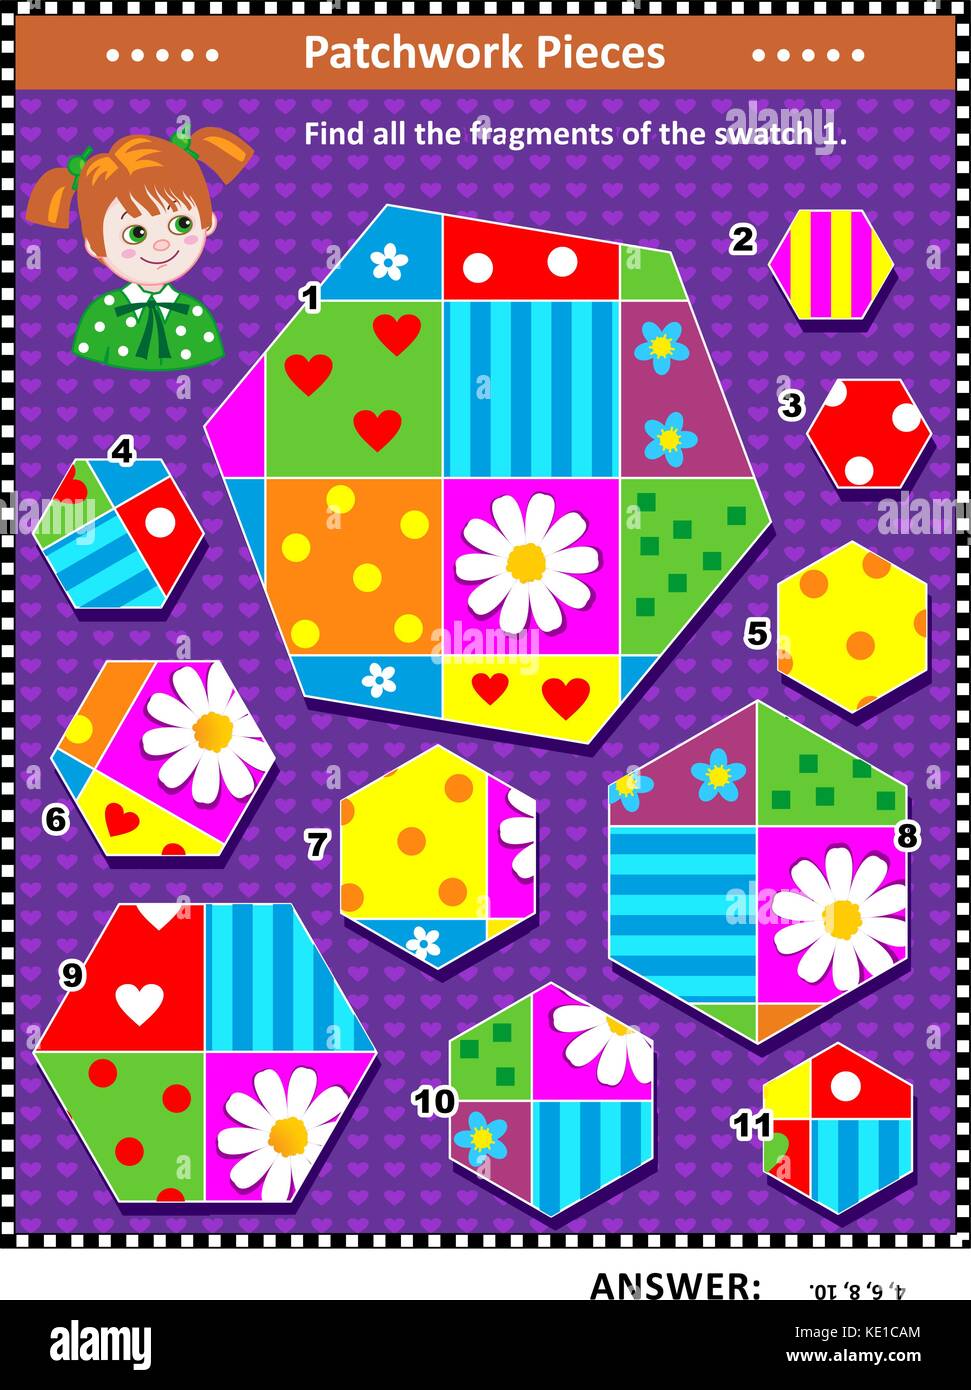 Quilting or patchwork themed IQ training visual puzzle (suitable both for kids and adults): Find all the fragments of the picture 1. Answer included. Stock Vector